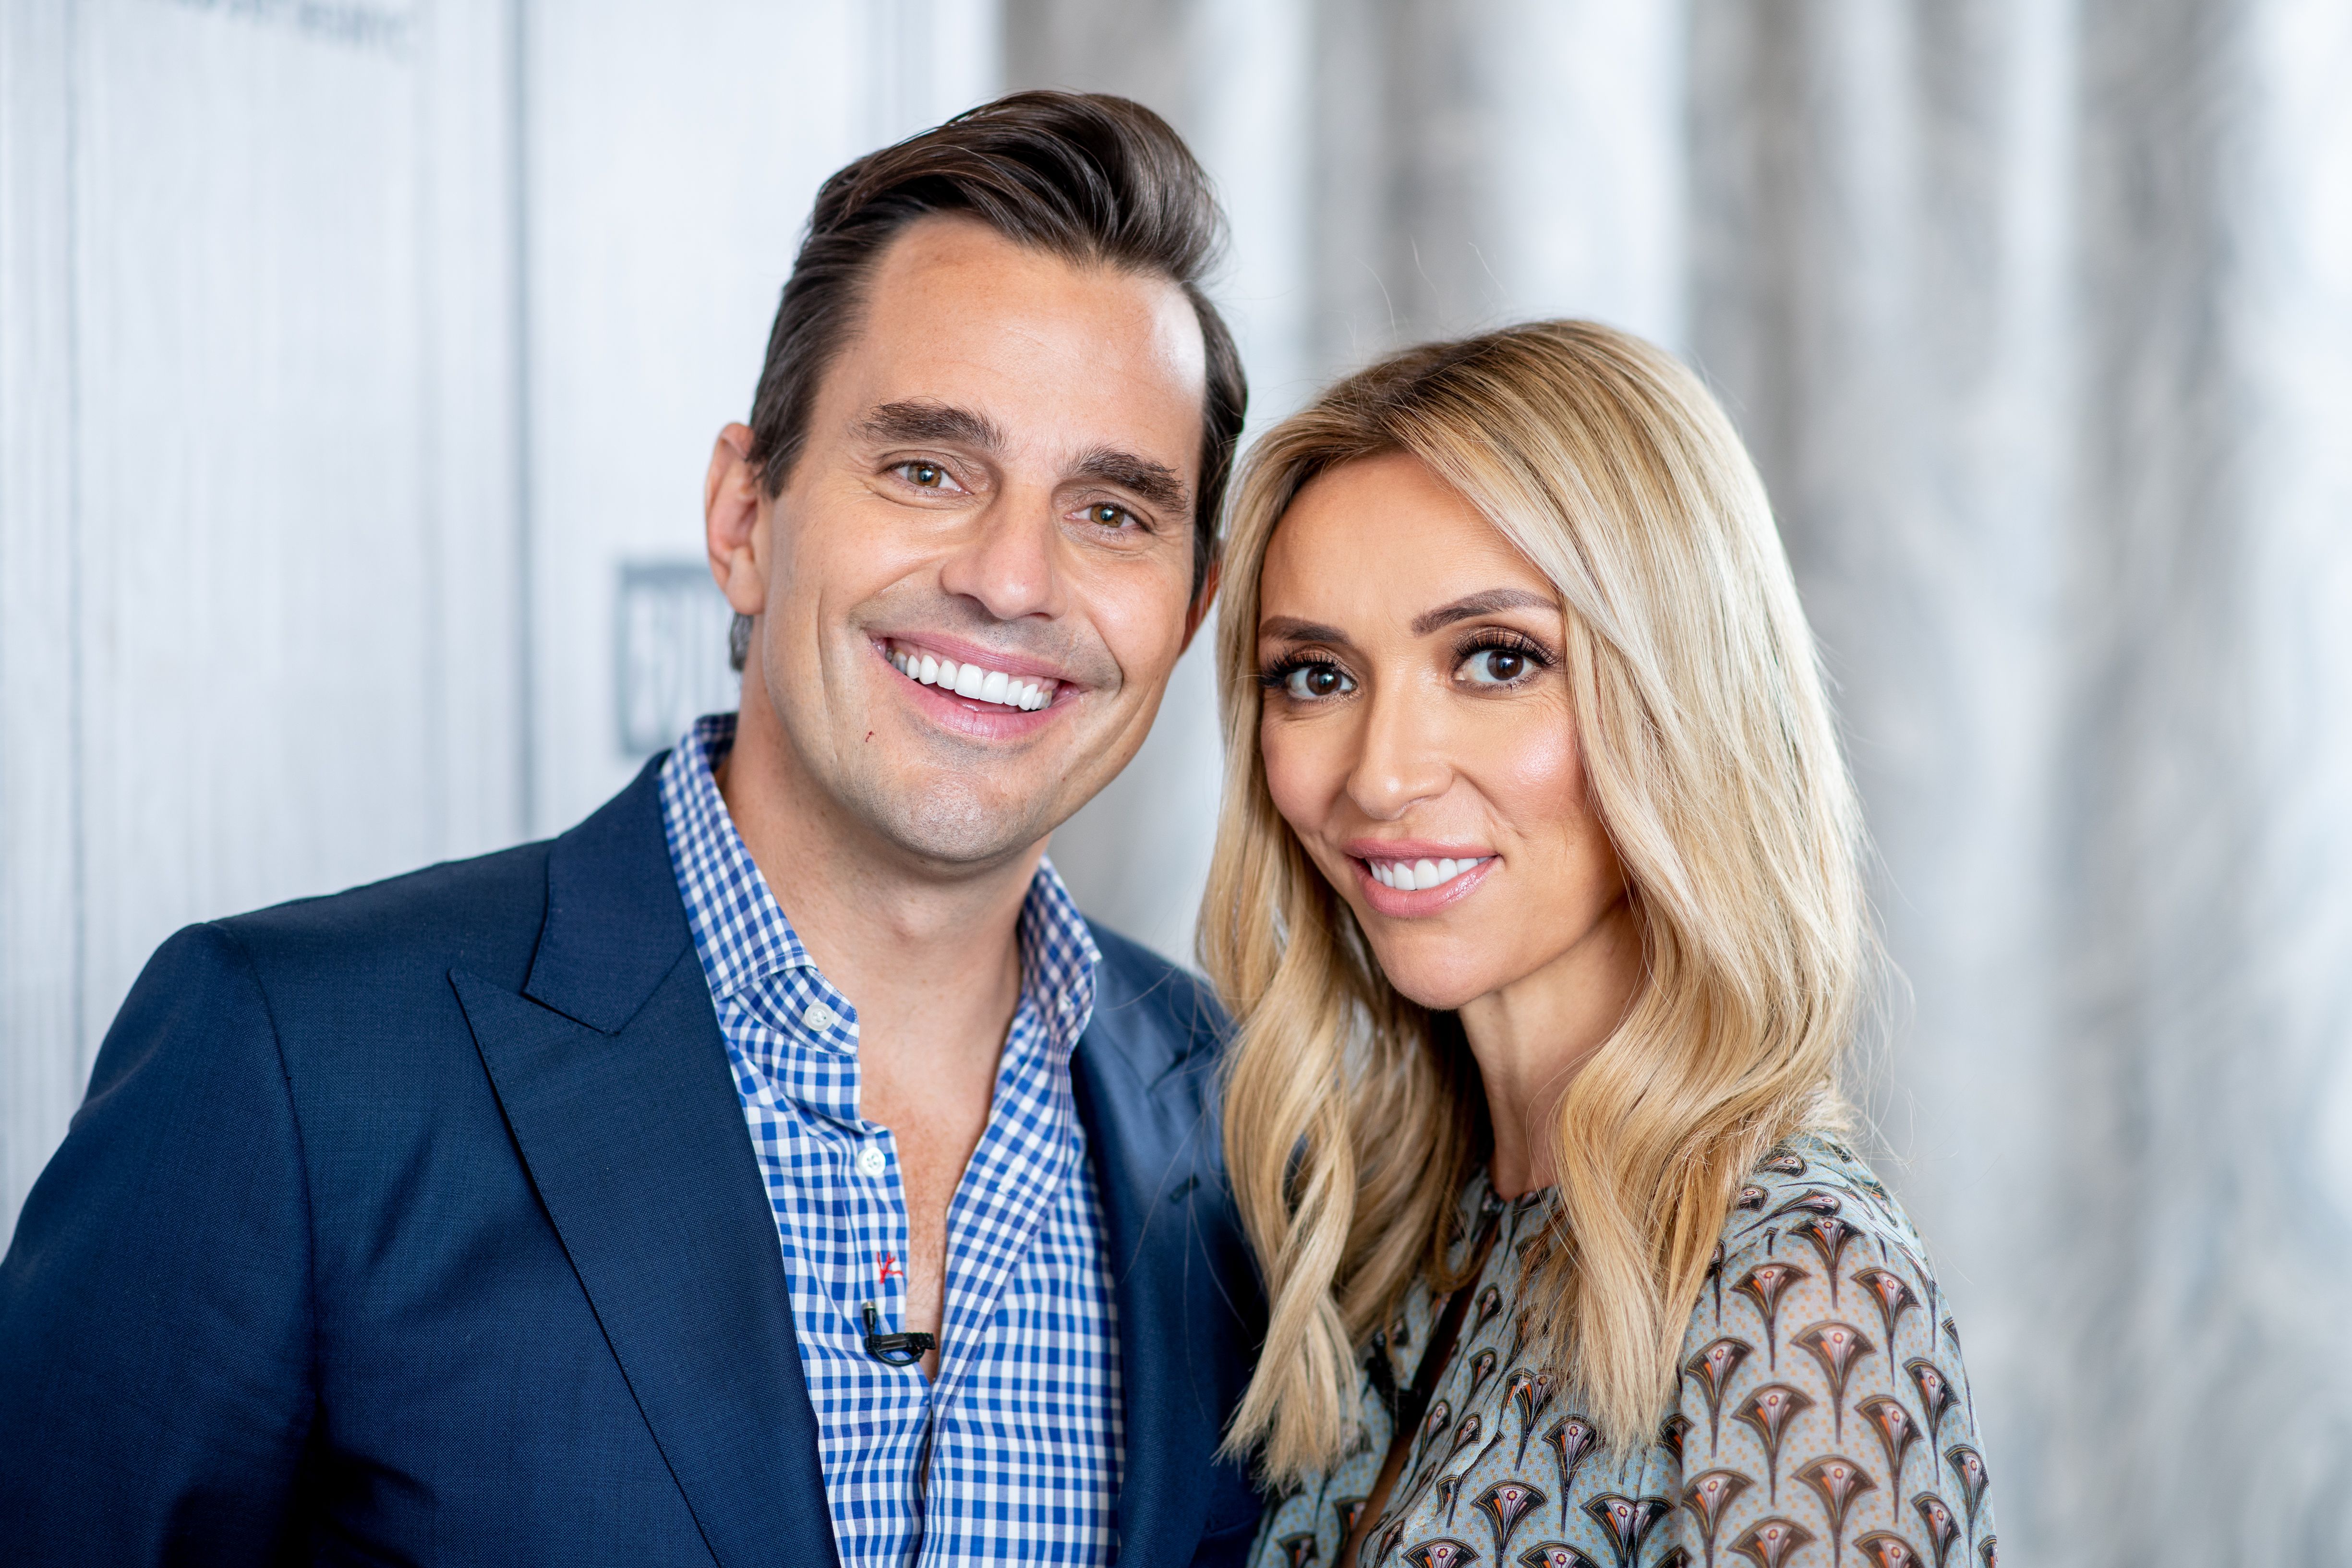 Bill and Giuliana Rancic visit Build Brunch at Build Studio on October 30, 2018, in New York City | Photo: Roy Rochlin/Getty Images